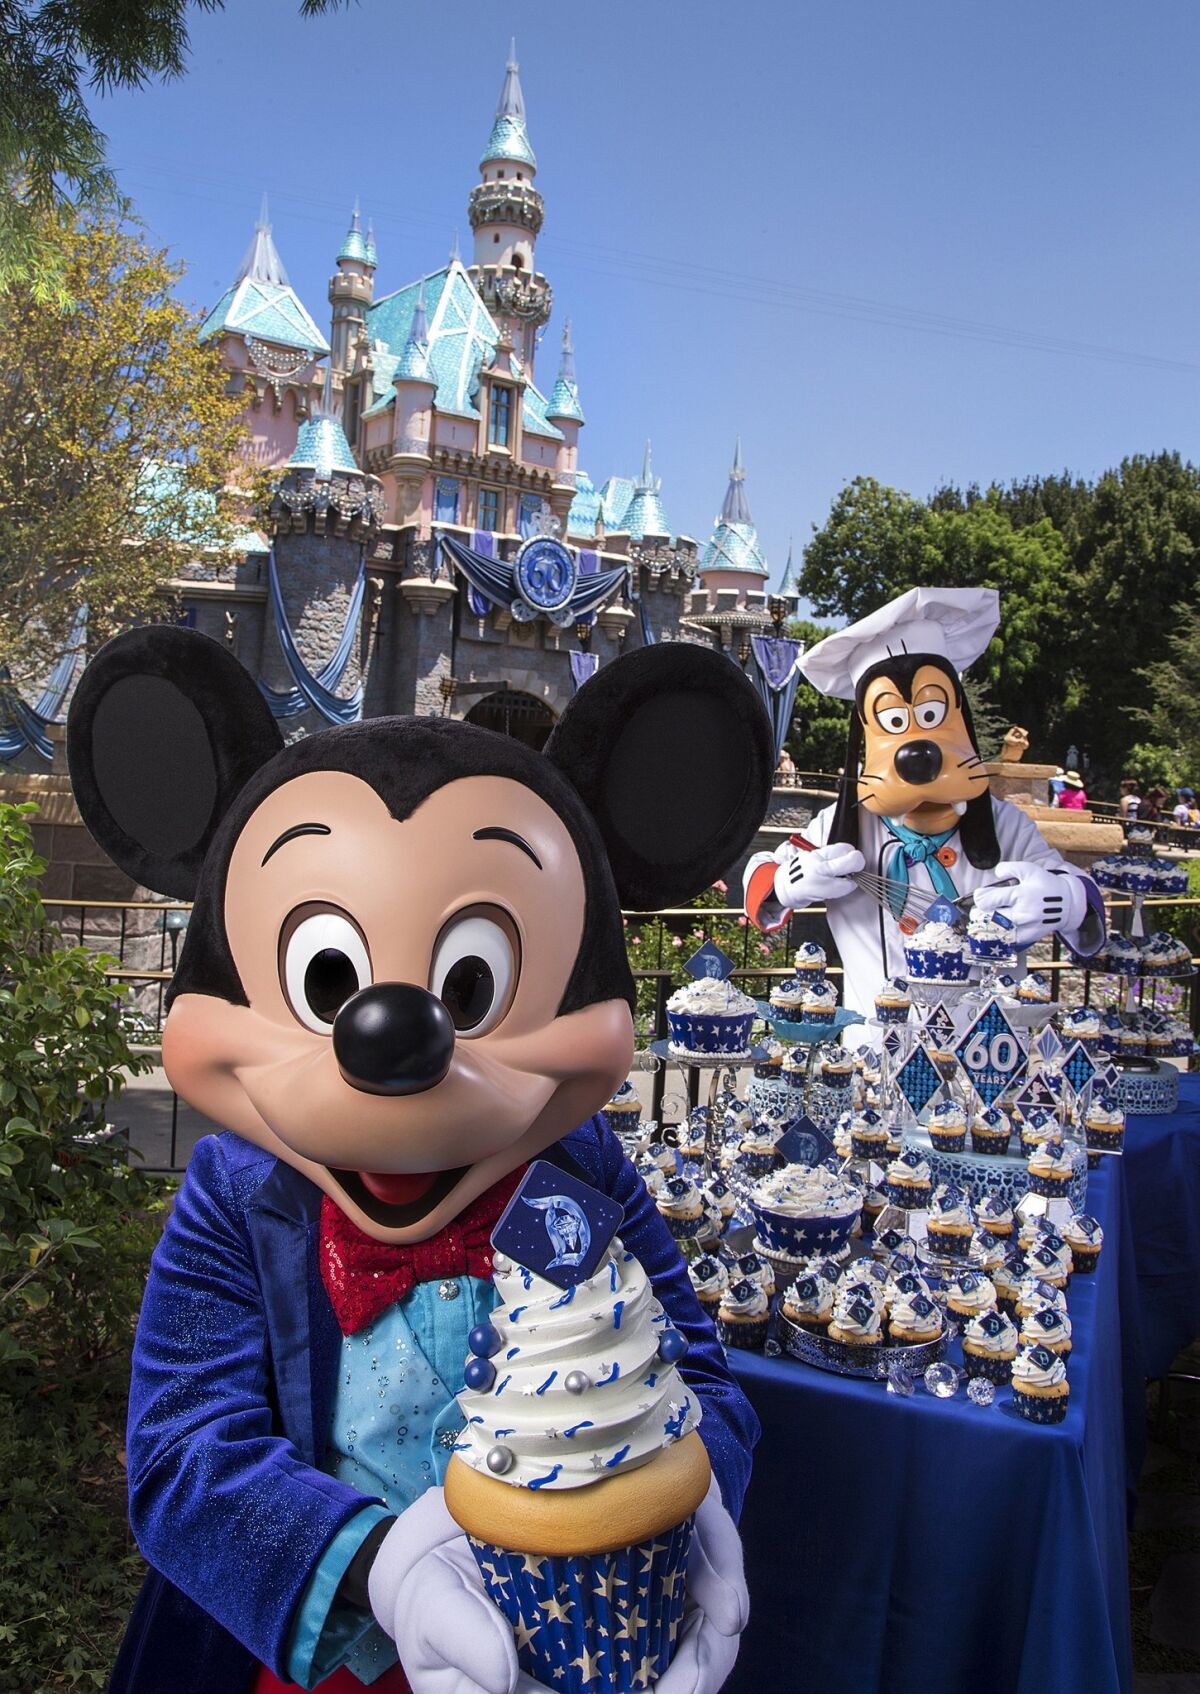 ANAHEIM, CA - JULY 16: In this handout photo provided by Disney Parks, on the eve of the 60th anniversary of the Disneyland Resort, Mickey Mouse and Goofy help prepare celebratory cupcakes July 16, 2015 at Disneyland park in Anaheim, California. Disneyland Resort park guests will receive a complimentary cupcake on Thursday, while supplies last, as the original Disney theme park marks 60 years since its July 17, 1955 grand opening. Celebrating six decades of magic, the Disneyland Resort Diamond Celebration features three new nighttime spectaculars that immerse guests in the worlds of Disney stories like never before with "Paint the Night," the first all-LED parade at the resort; "Disneyland Forever," a reinvention of classic fireworks that adds projections to pyrotechnics to transform the park experience; and a moving new version of "World of Color" that celebrates Walt Disney's dream for Disneyland. (Photo by Paul Hiffmeyer/Disneyland Resort via Getty Images) ** OUTS - ELSENT, FPG - OUTS * NM, PH, VA if sourced by CT, LA or MoD **